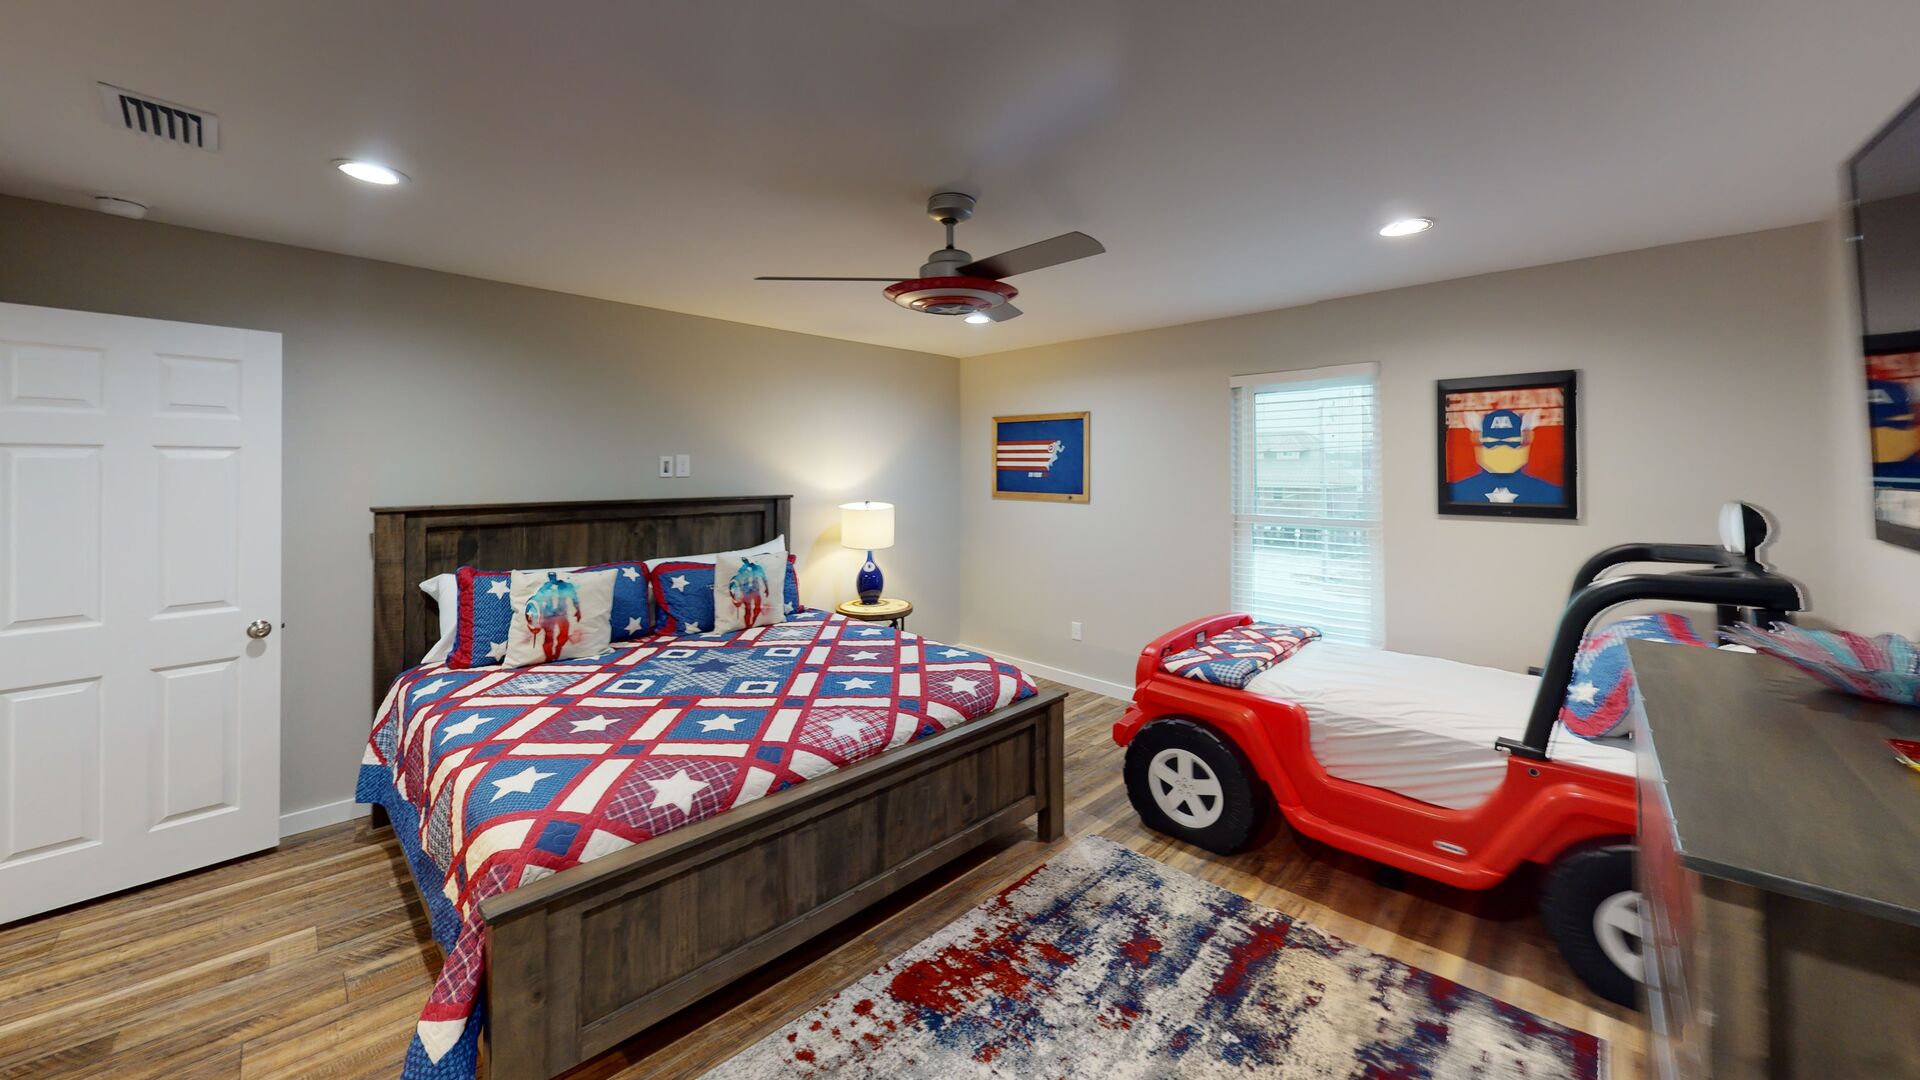 2nd floor bedroom #6 features a king and a twin bed, sleeps 3